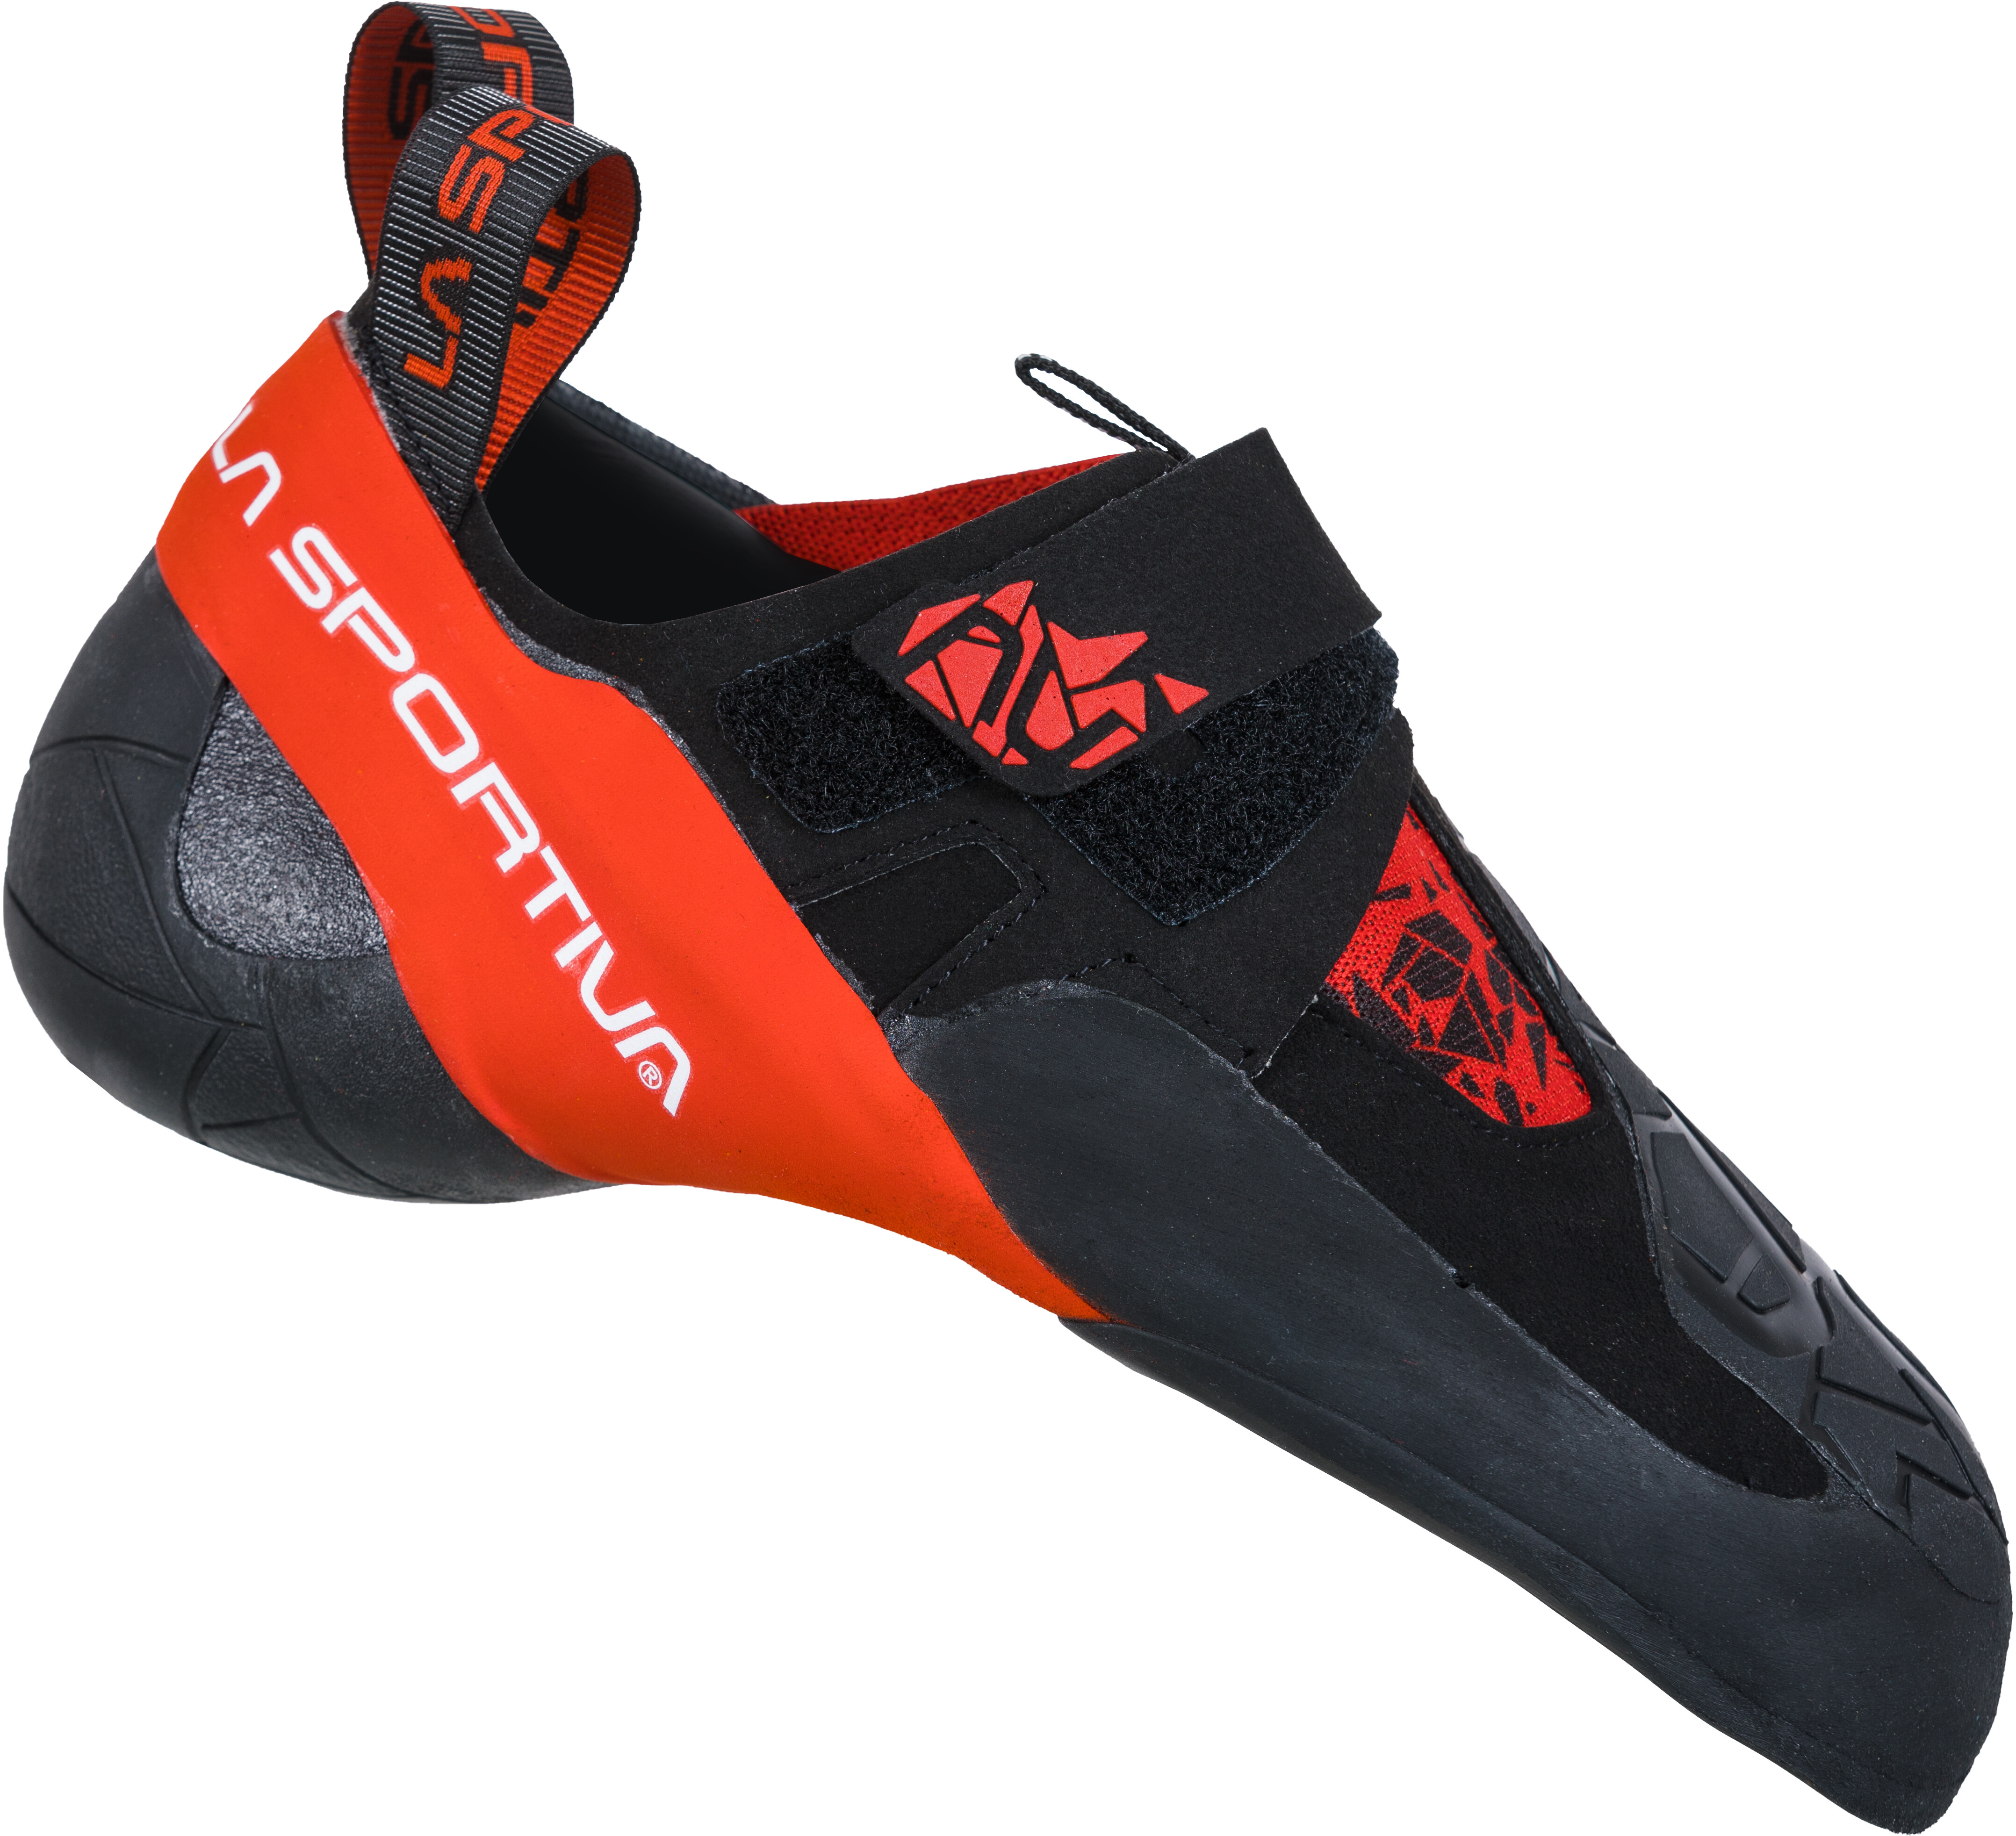 La Sportiva Skwama - Chaussons escalade homme